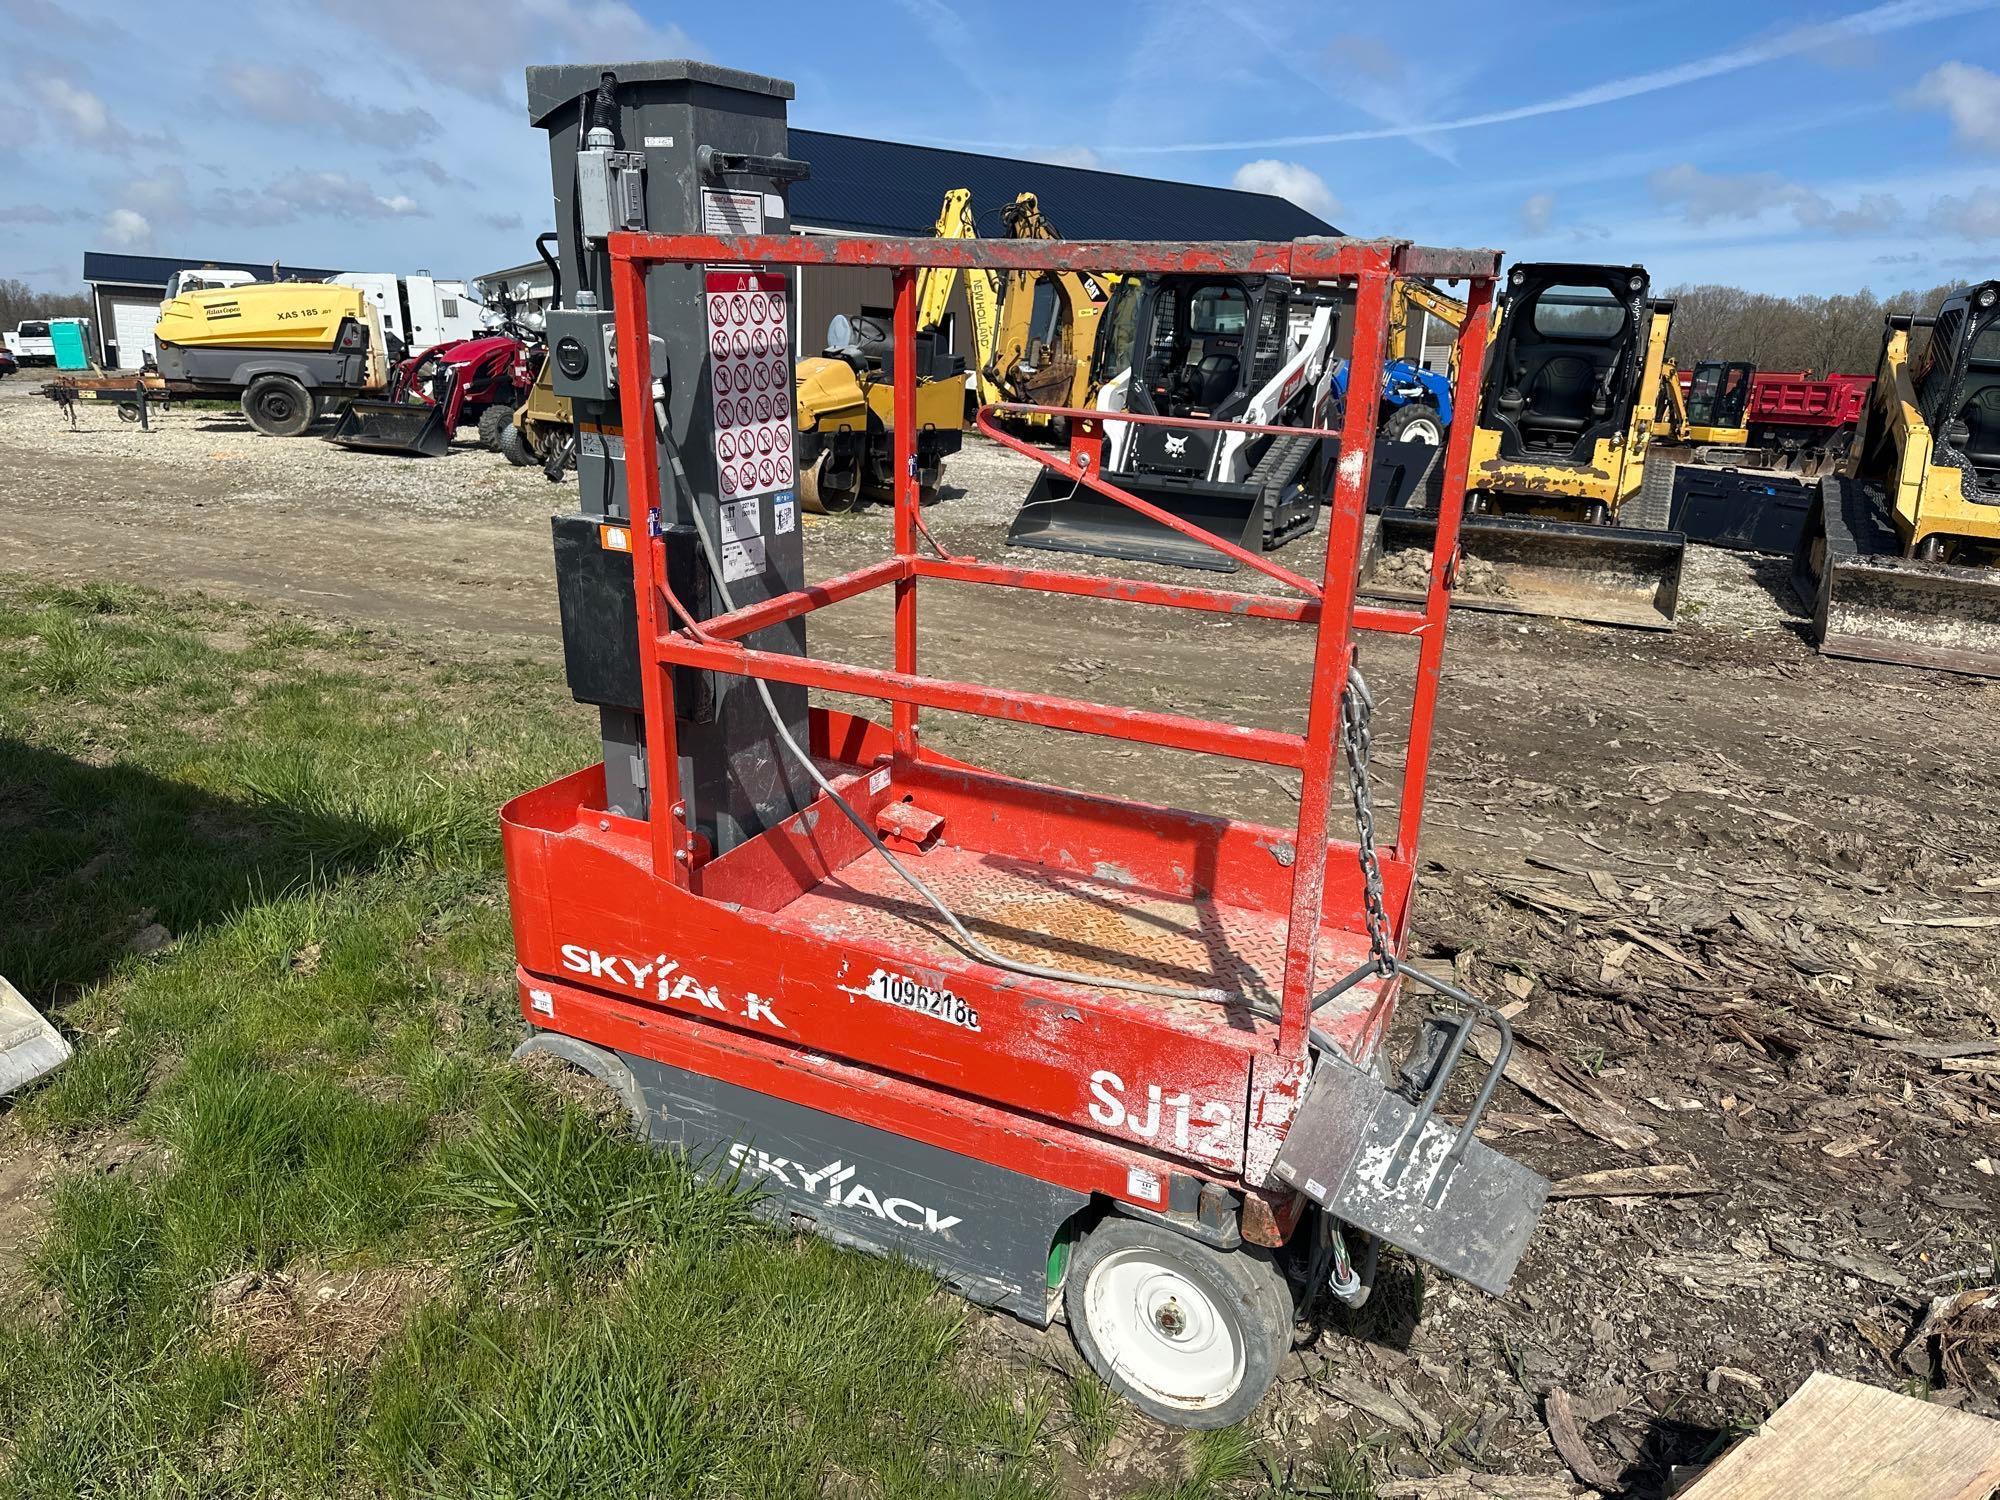 2019 SJ12 SKYJACK SCISSOR LIFT electric powered, equipped with 12ft. Platform height. HR-184